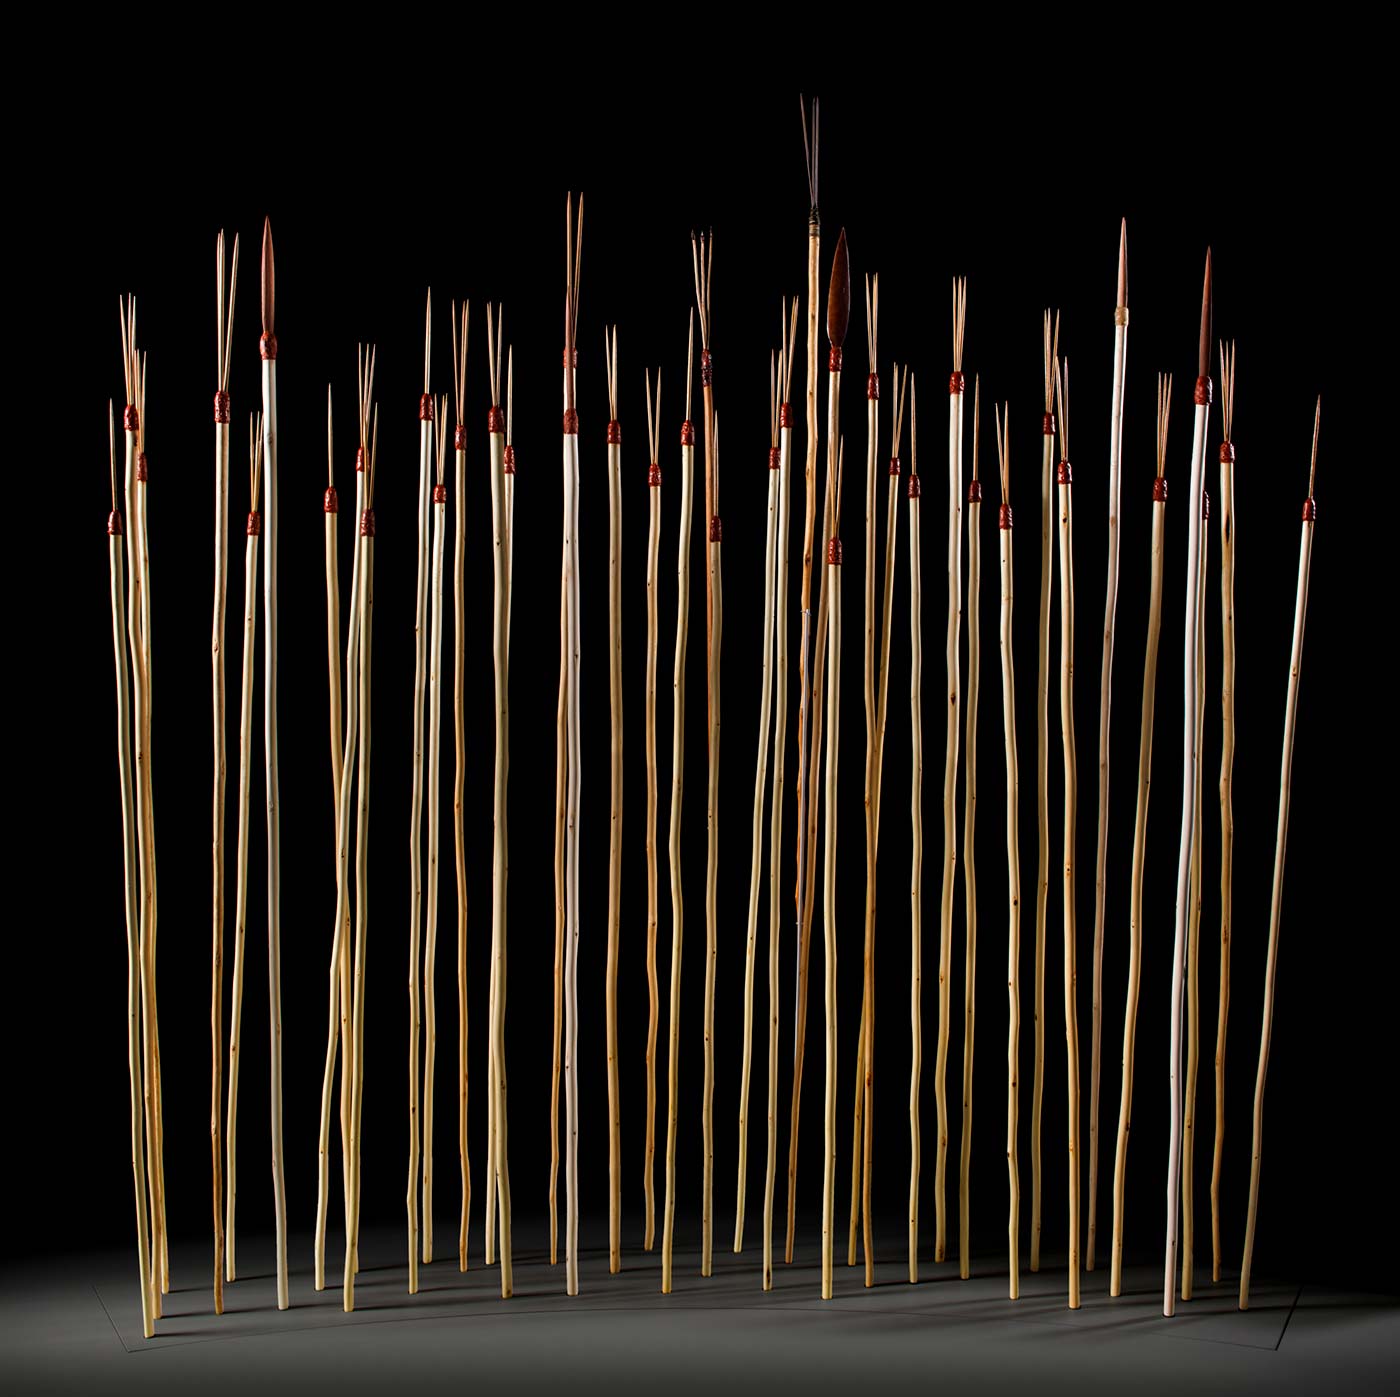 A large collection of spears on display. One type of spear has three sharp prongs and the other type features elongated shapes.